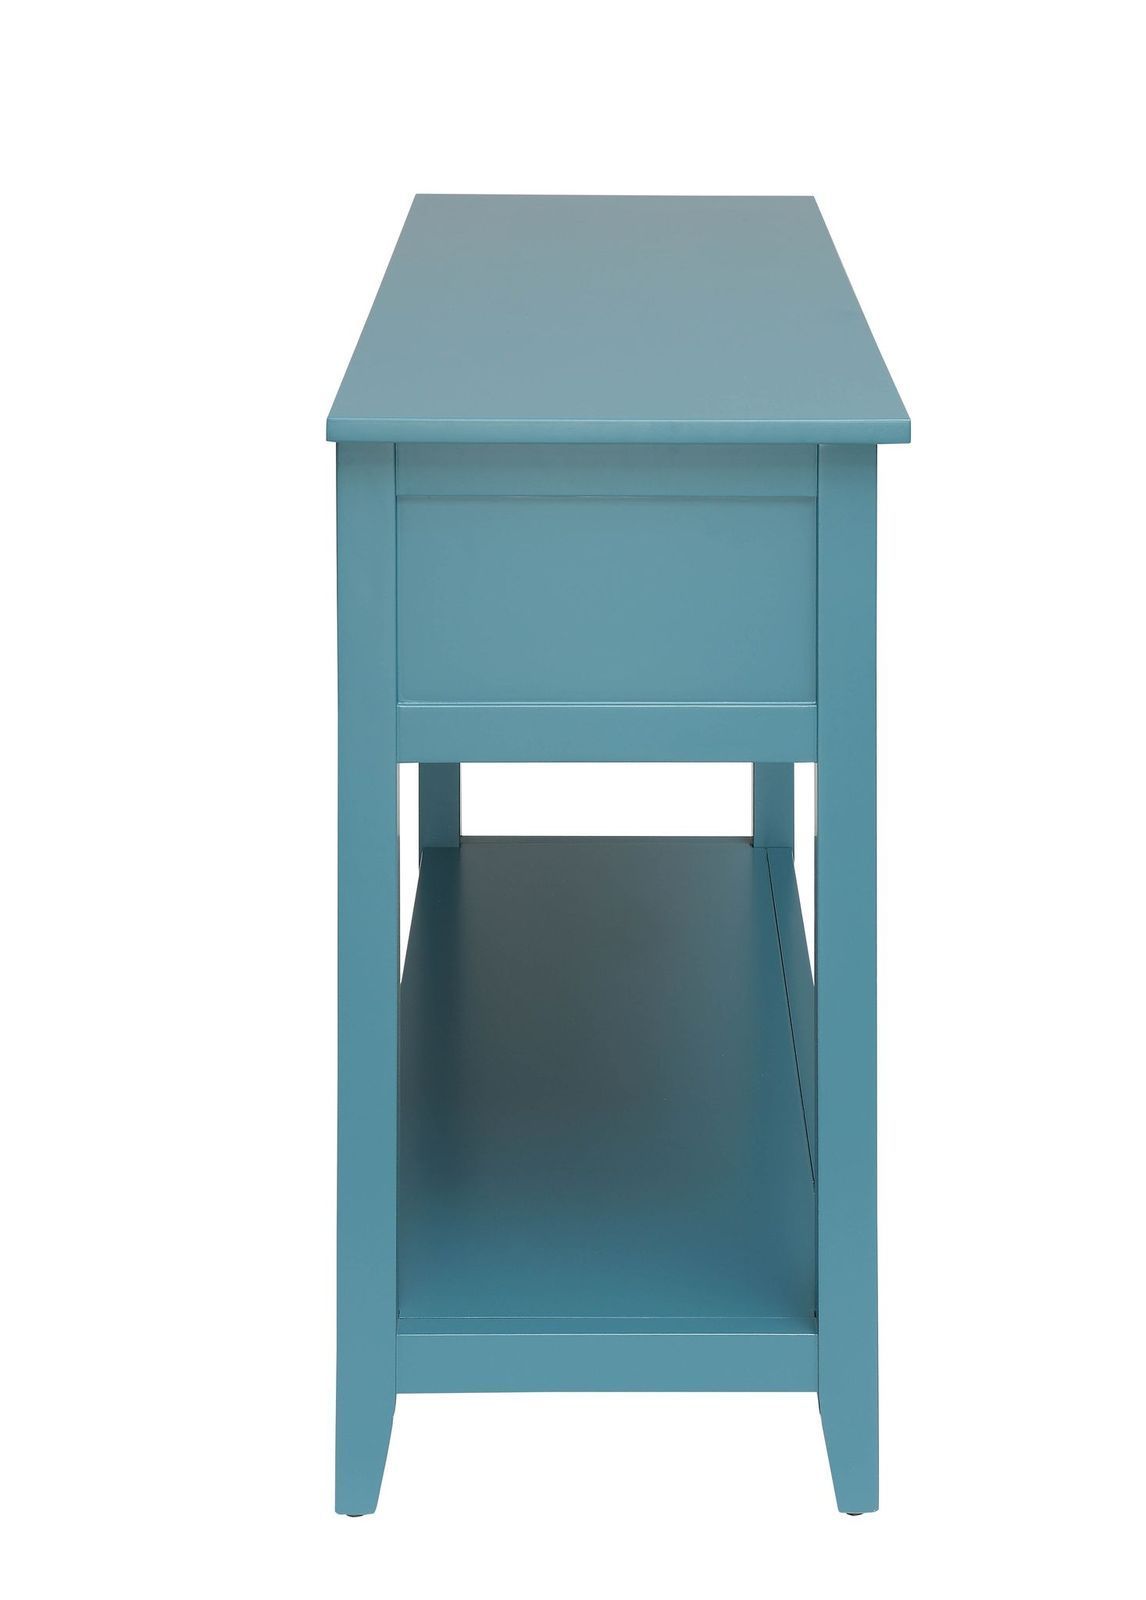 ACME Flavius Console Table in Teal 90266 - Groovy Boardz